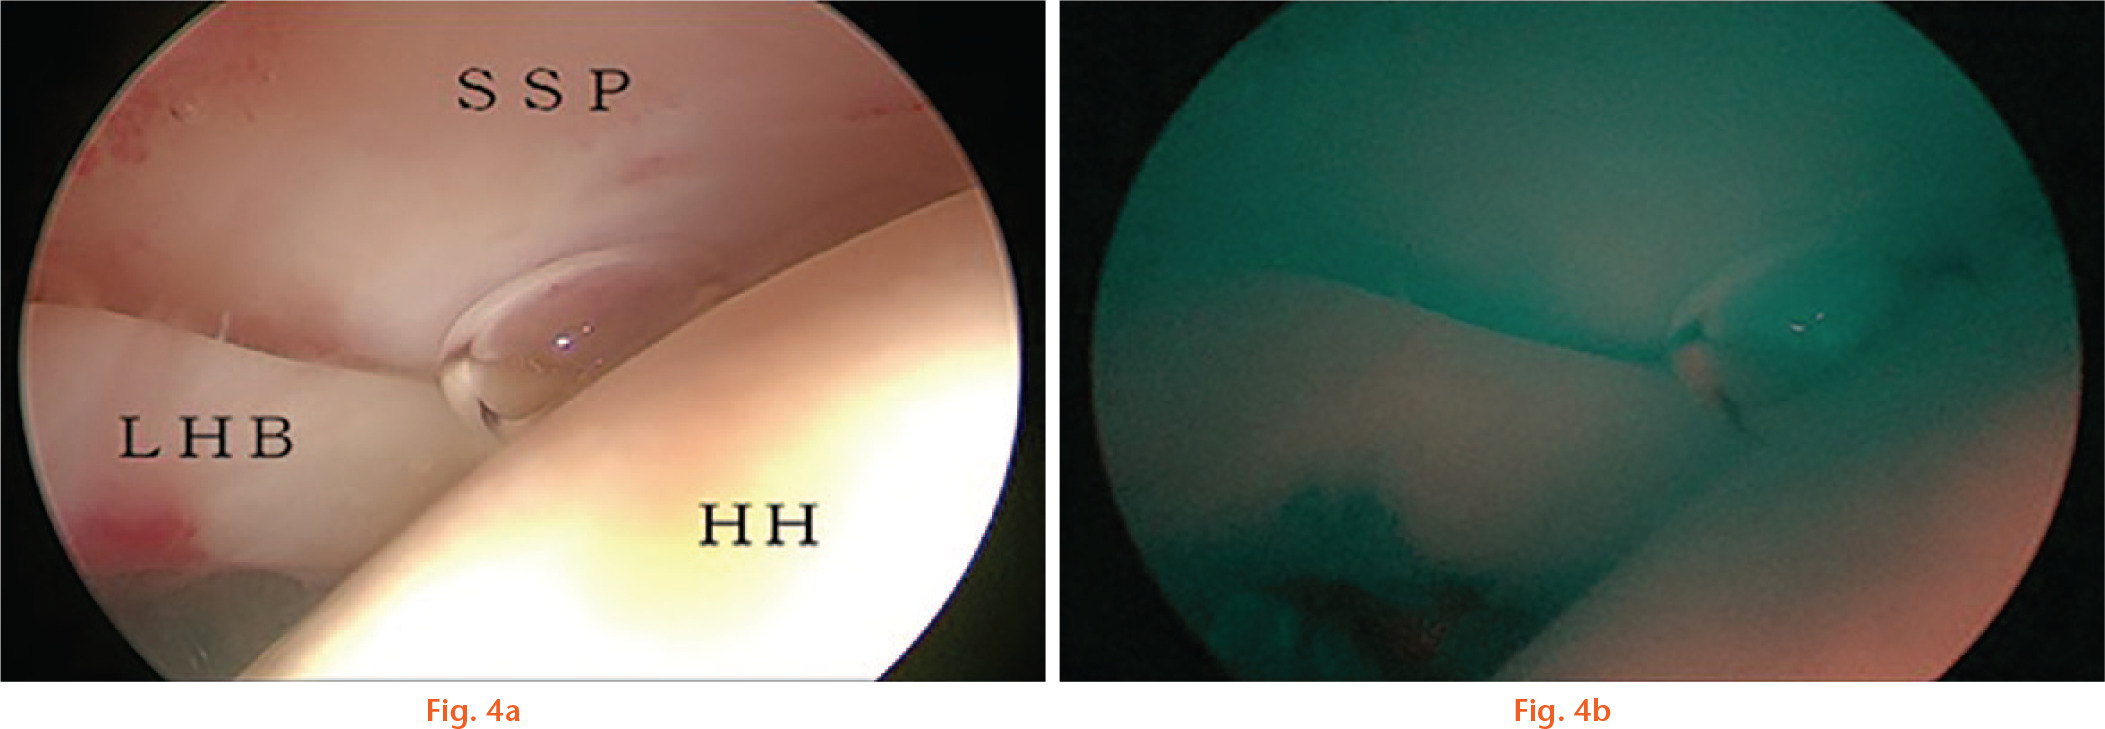 Fig. 4 
          a) Anterolateral area of adhesive capsulitis observed before ICG fluorescence angiography; b) Anterolateral area of adhesive capsulitis observed at the time of ICG fluorescence angiography. SSP, supraspinatus tendon; LHB, long head of biceps brachii; HH, head of humerus.
        